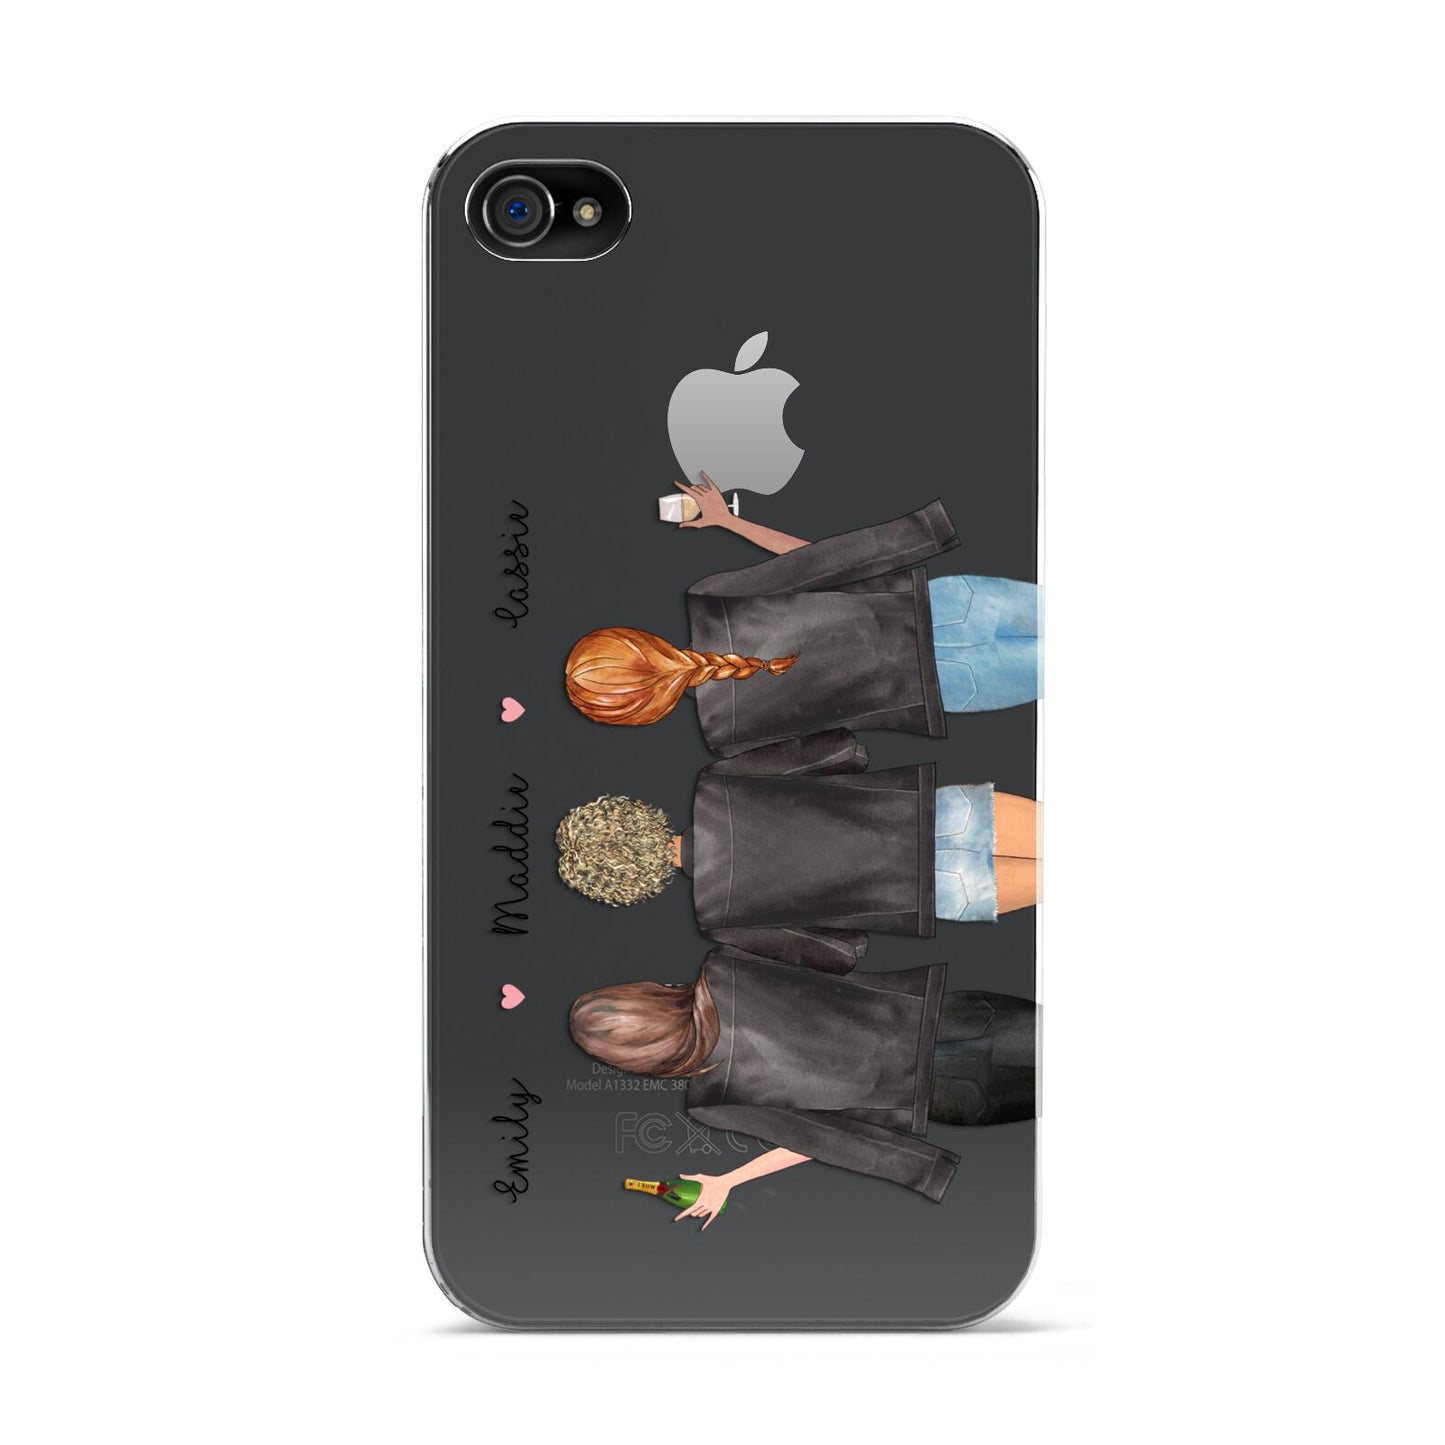 3 Best Friends with Names Apple iPhone 4s Case